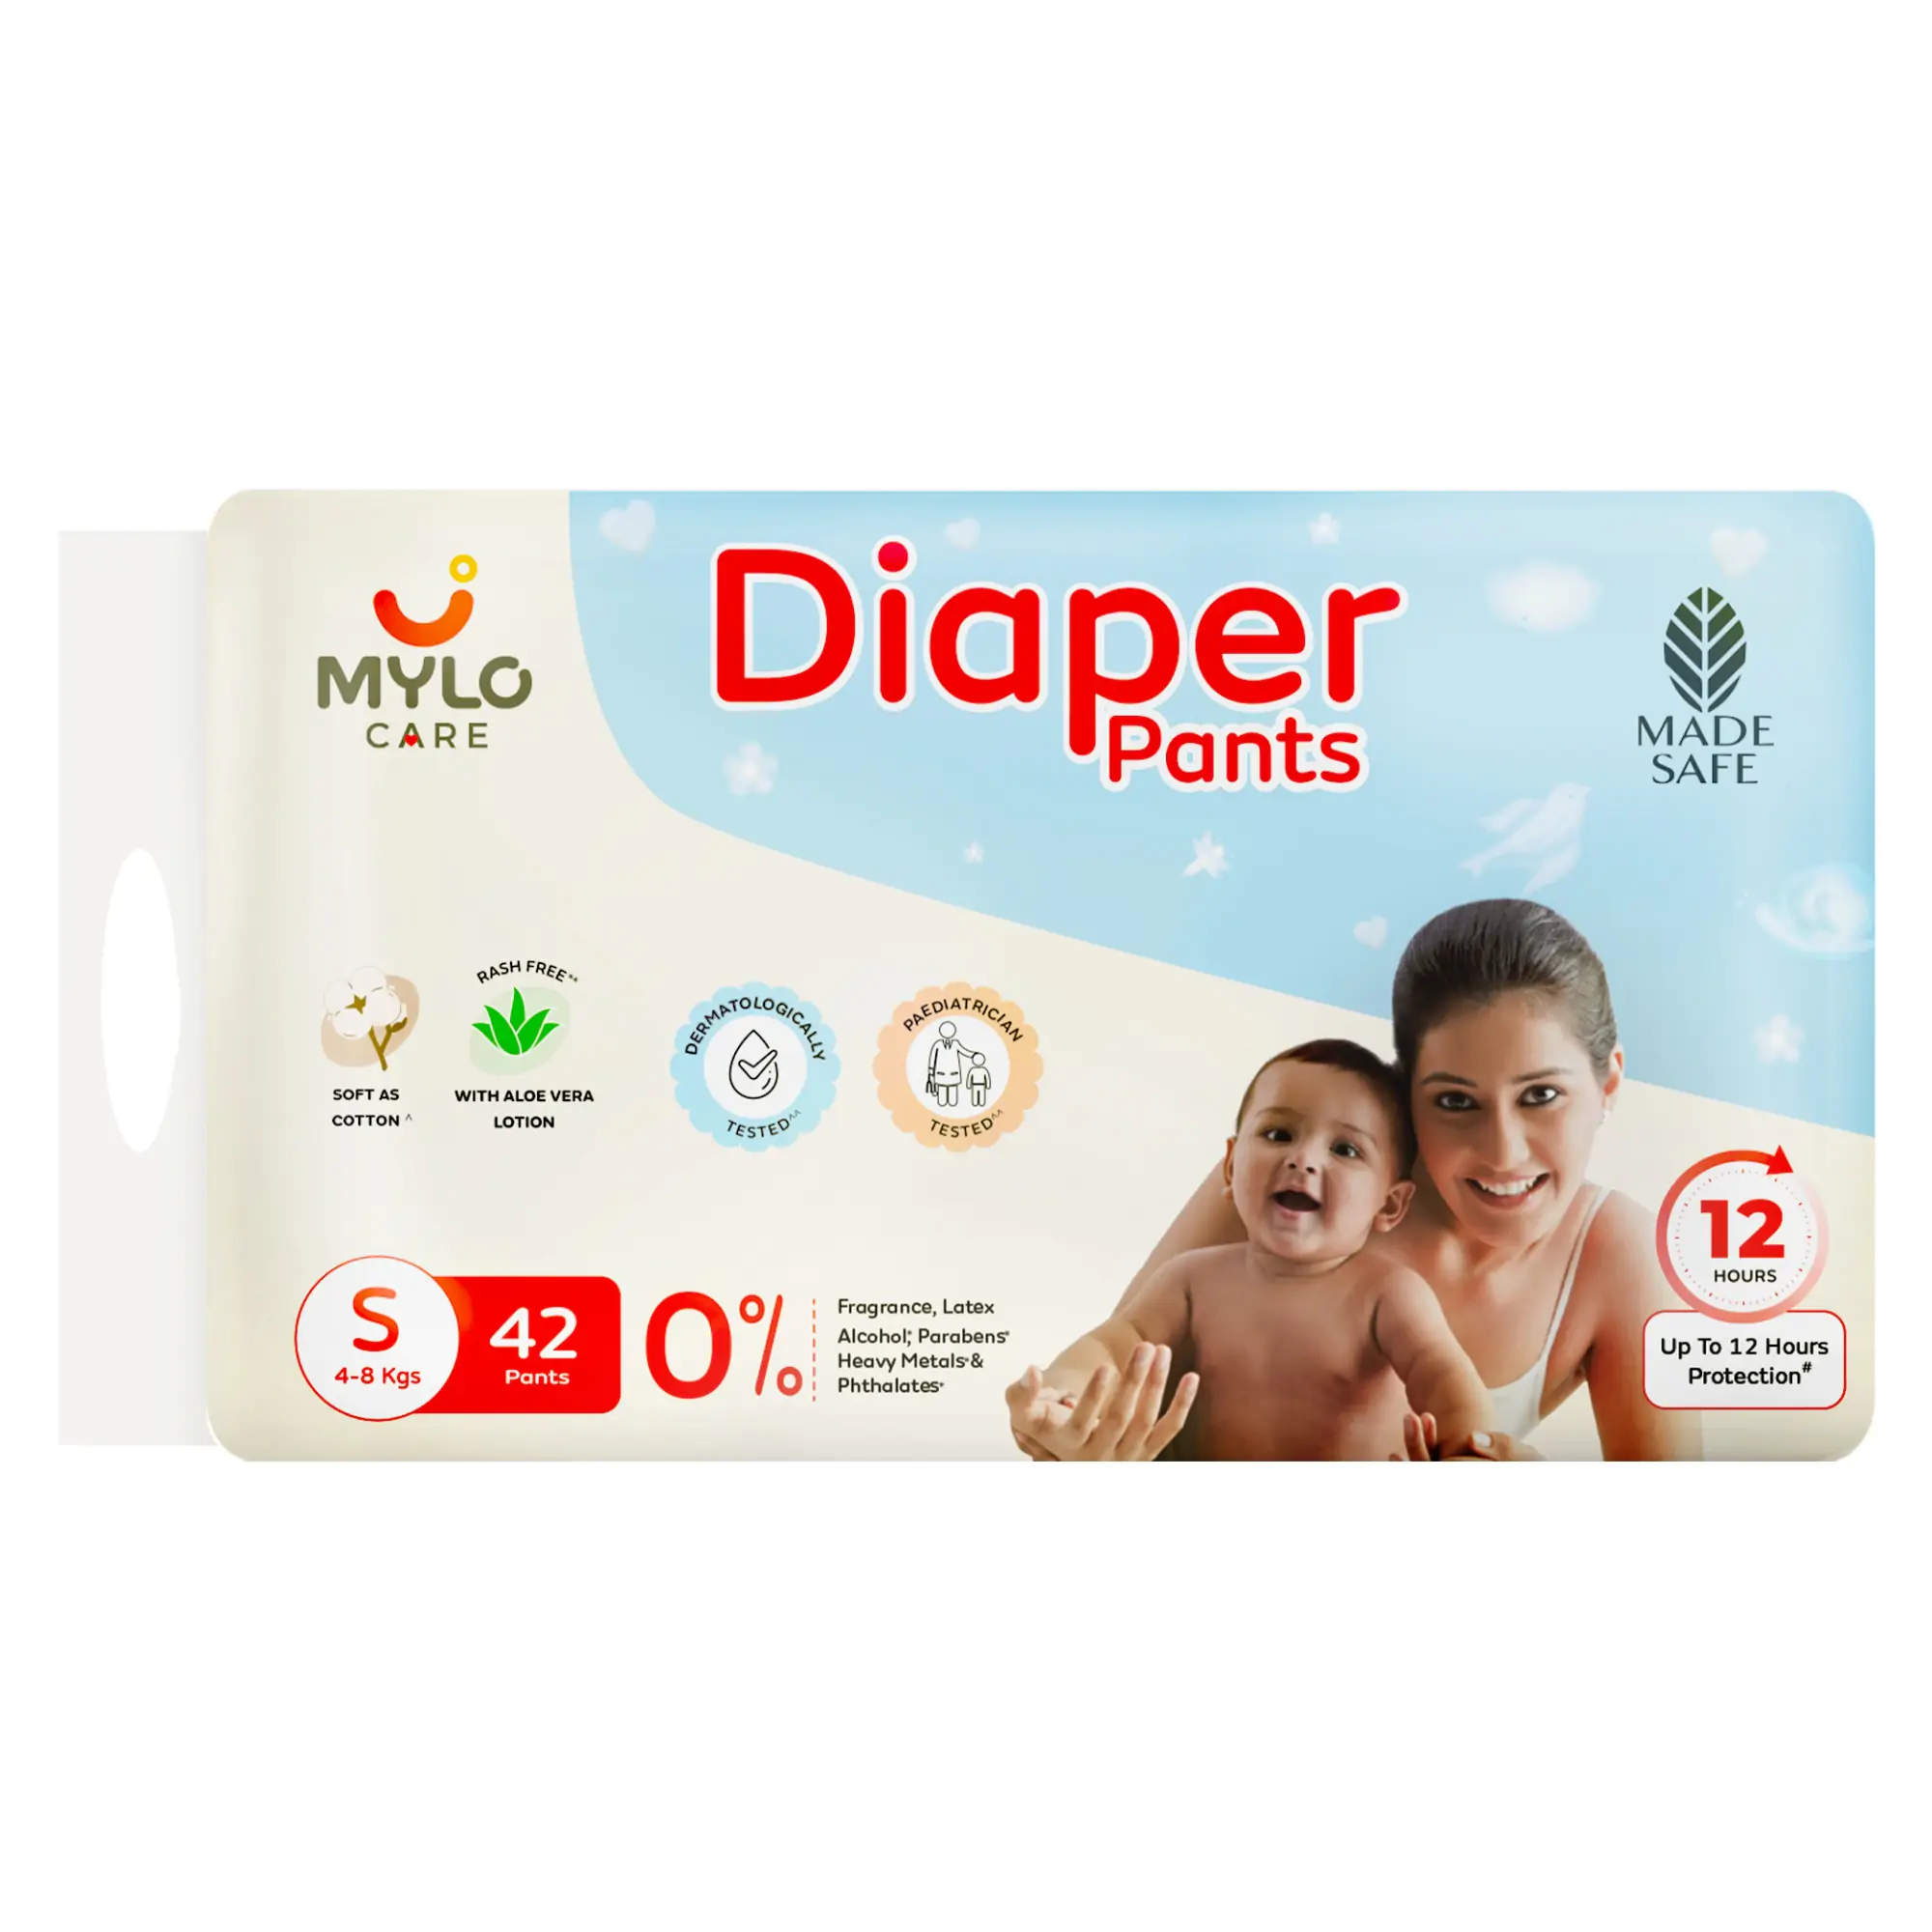 Mylo Care Baby Diaper Pants Small (S) Size, 4-8 kgs with ADL Technology - 42 Count - 12 Hours Protection